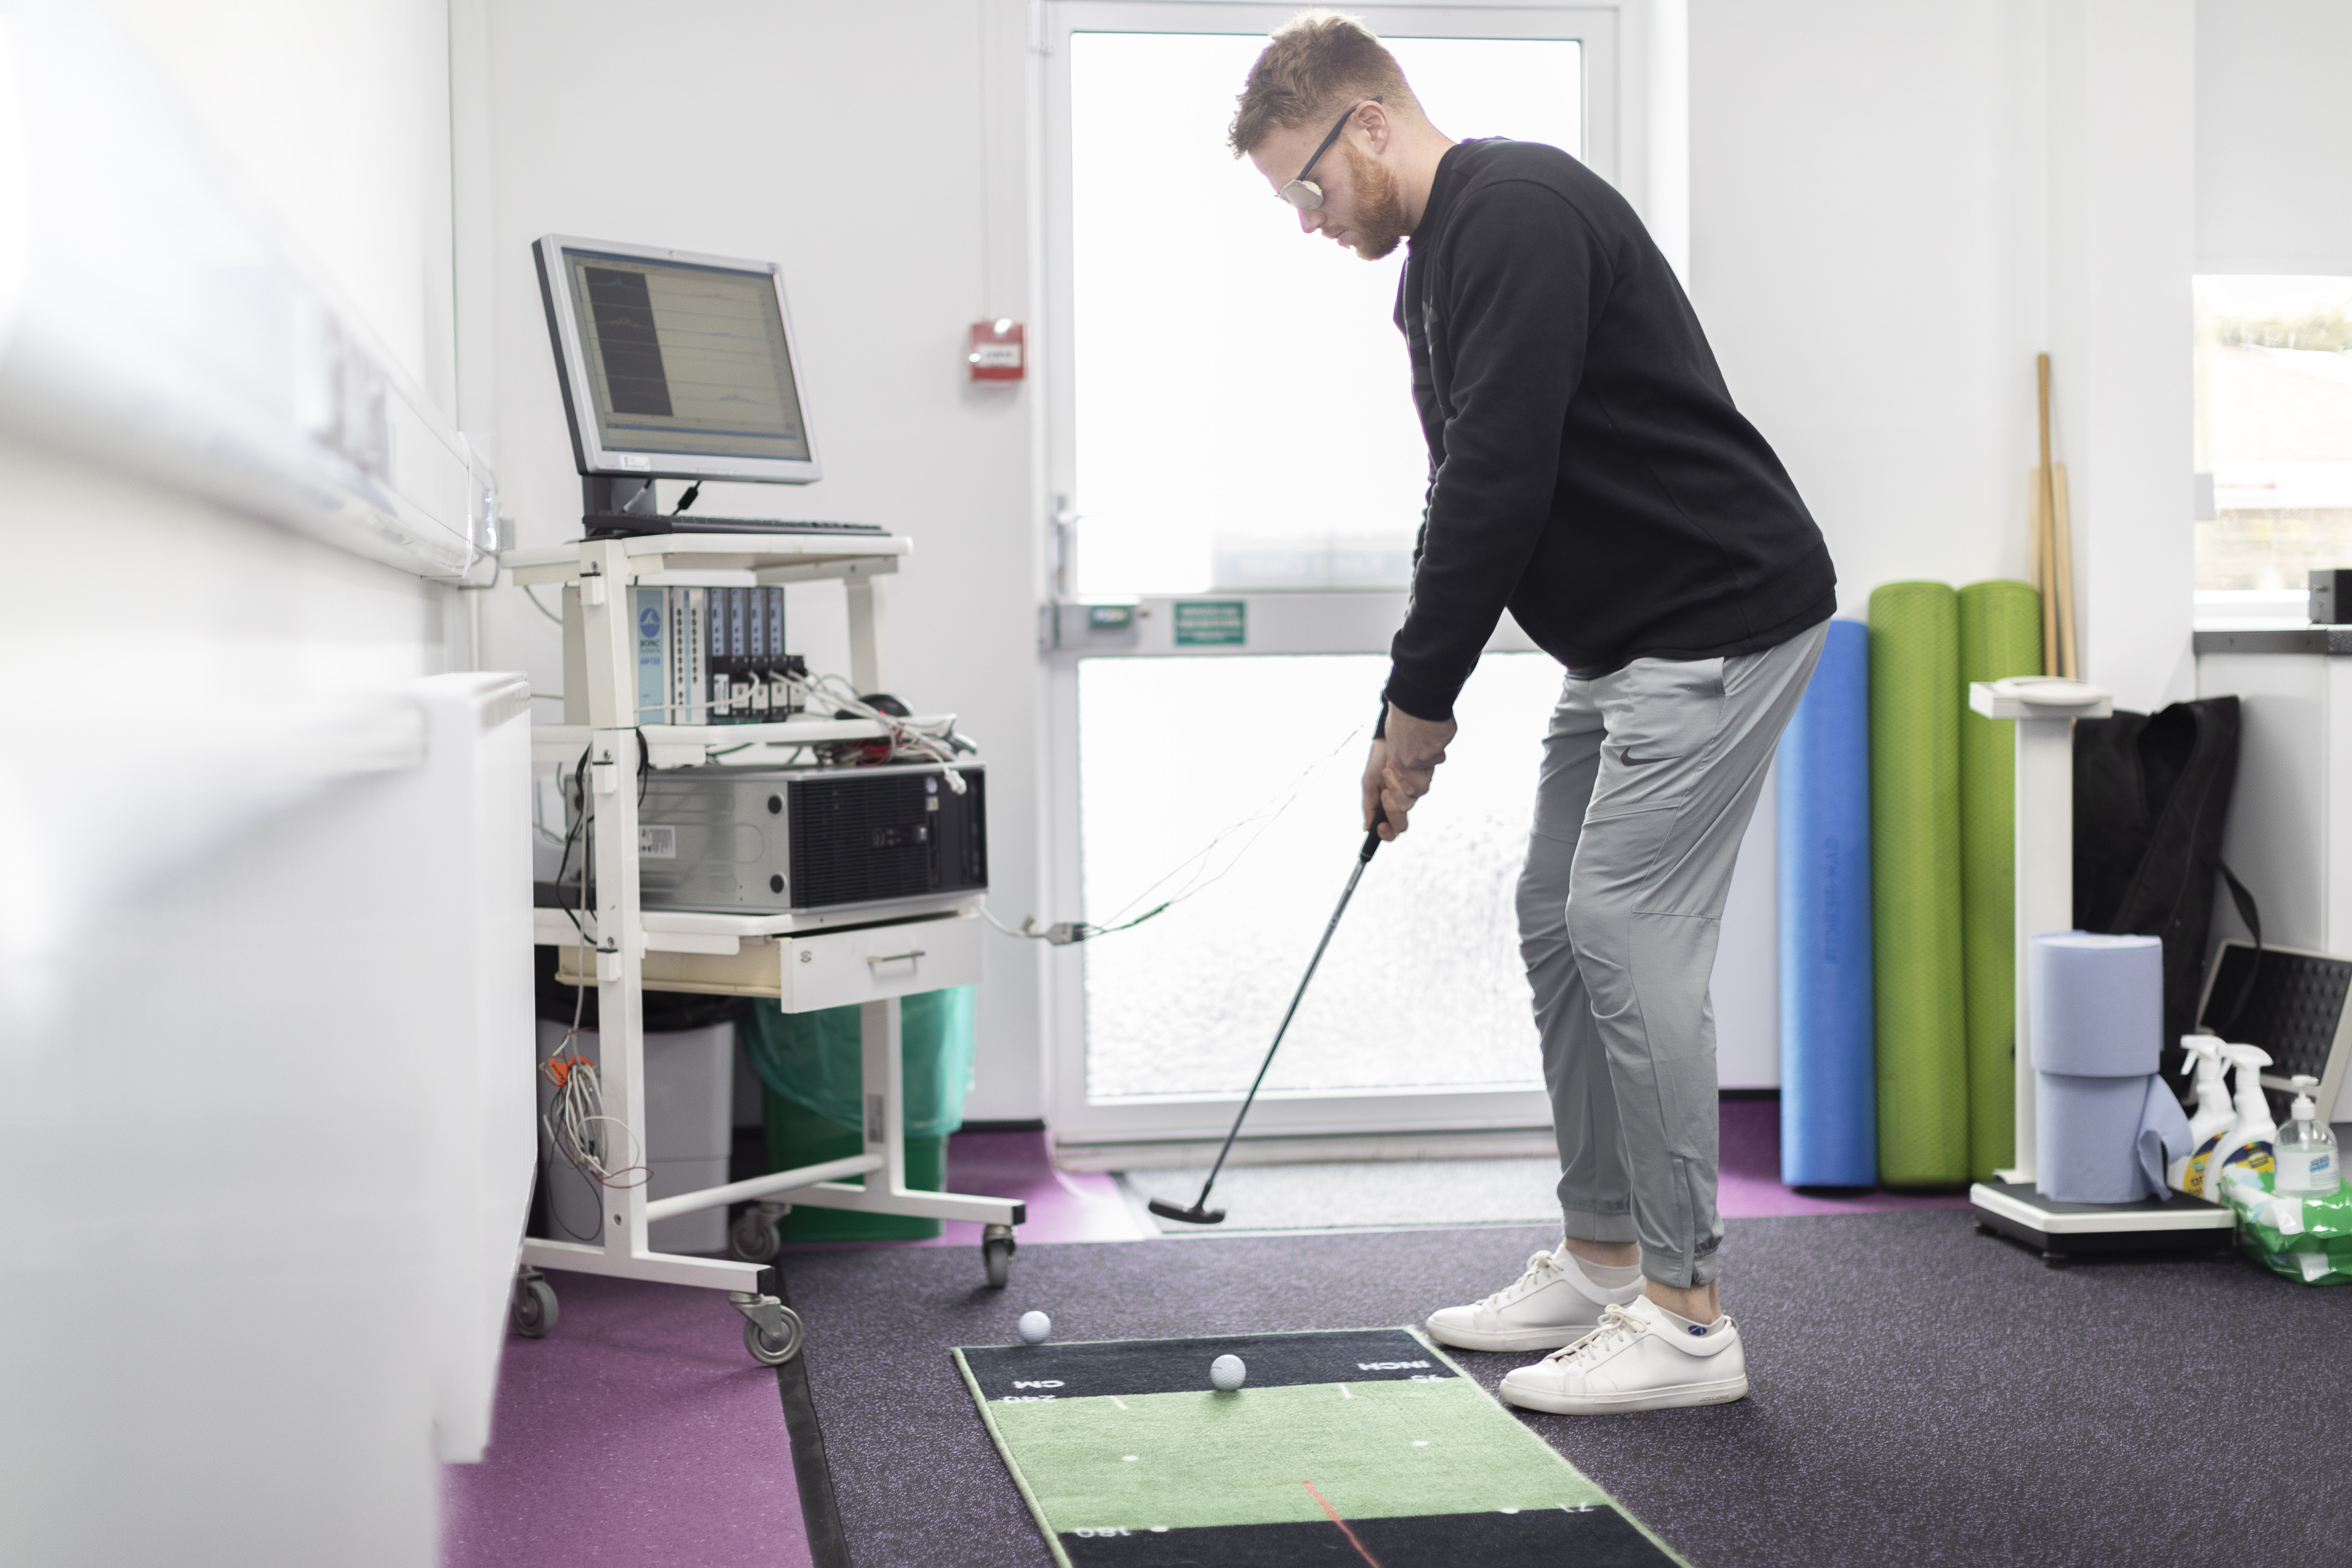 MSc Sport and Exercise Psychology student working on golf technique